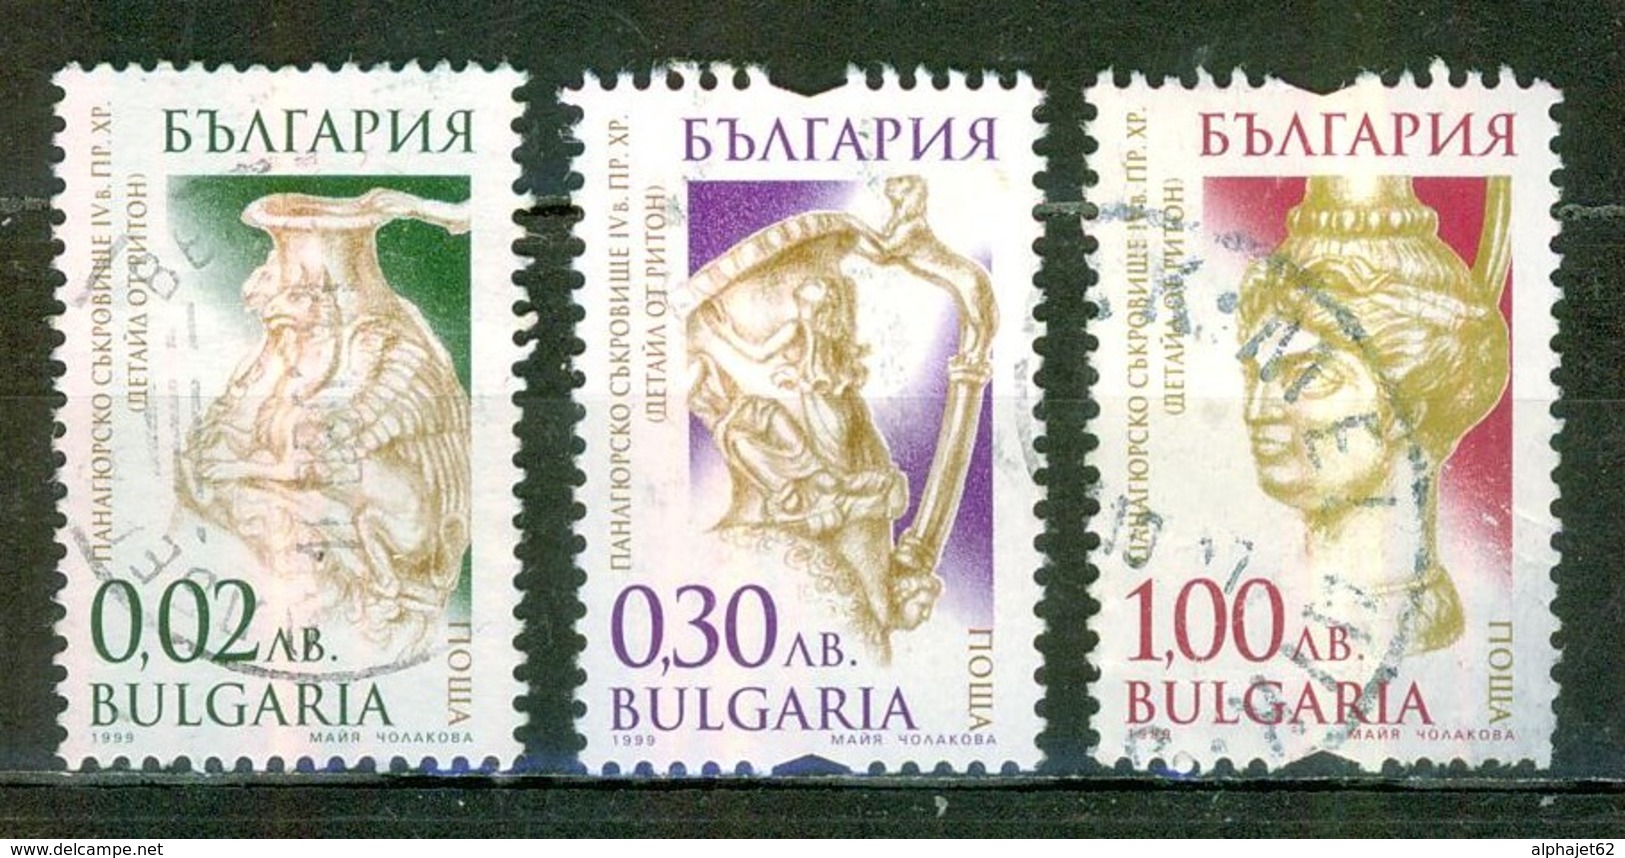 Or, Antiquités - BULGARIE - Animaux Fabuleux, Lions - Statuettes Anciennes - N° 3840-3843 A - 3844 A- 1999 - Used Stamps